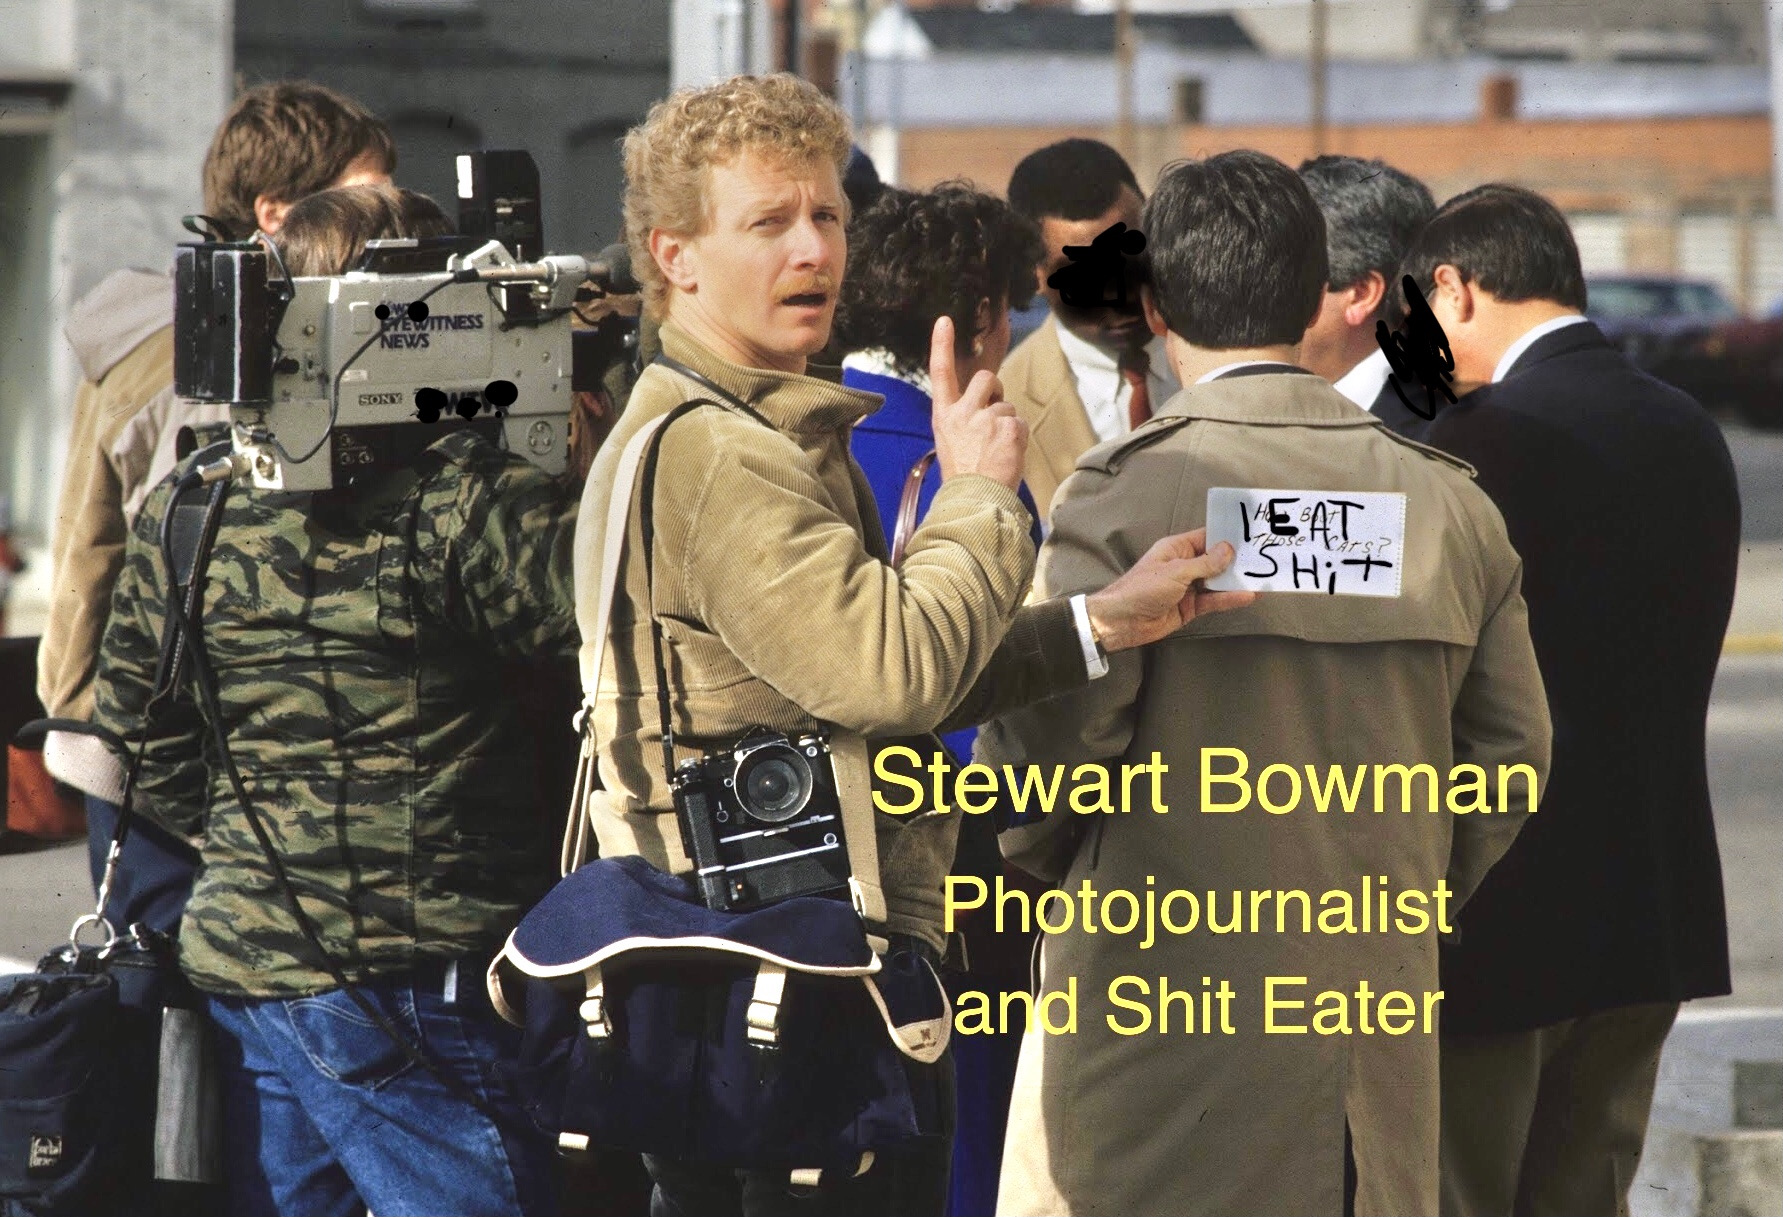 Black Man Shits in Stewart the Photojournalist's Mouth